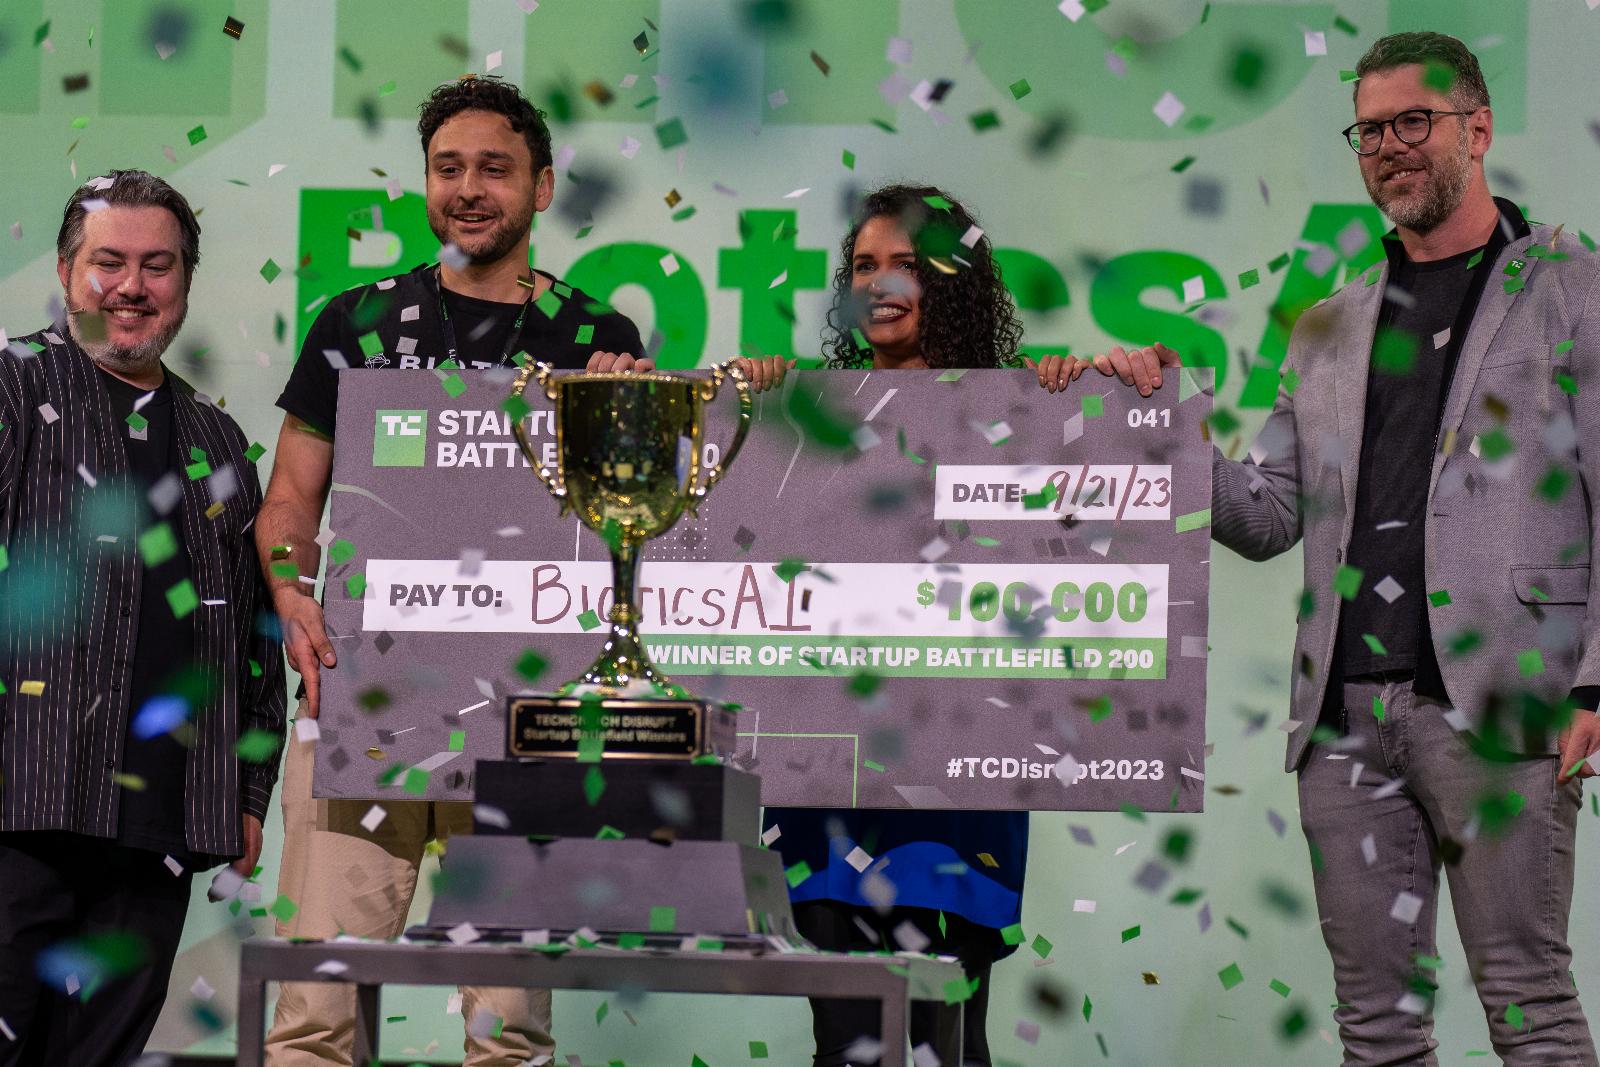 And the winner of Startup Battlefield at Disrupt 2023 is . . . BioticsAI